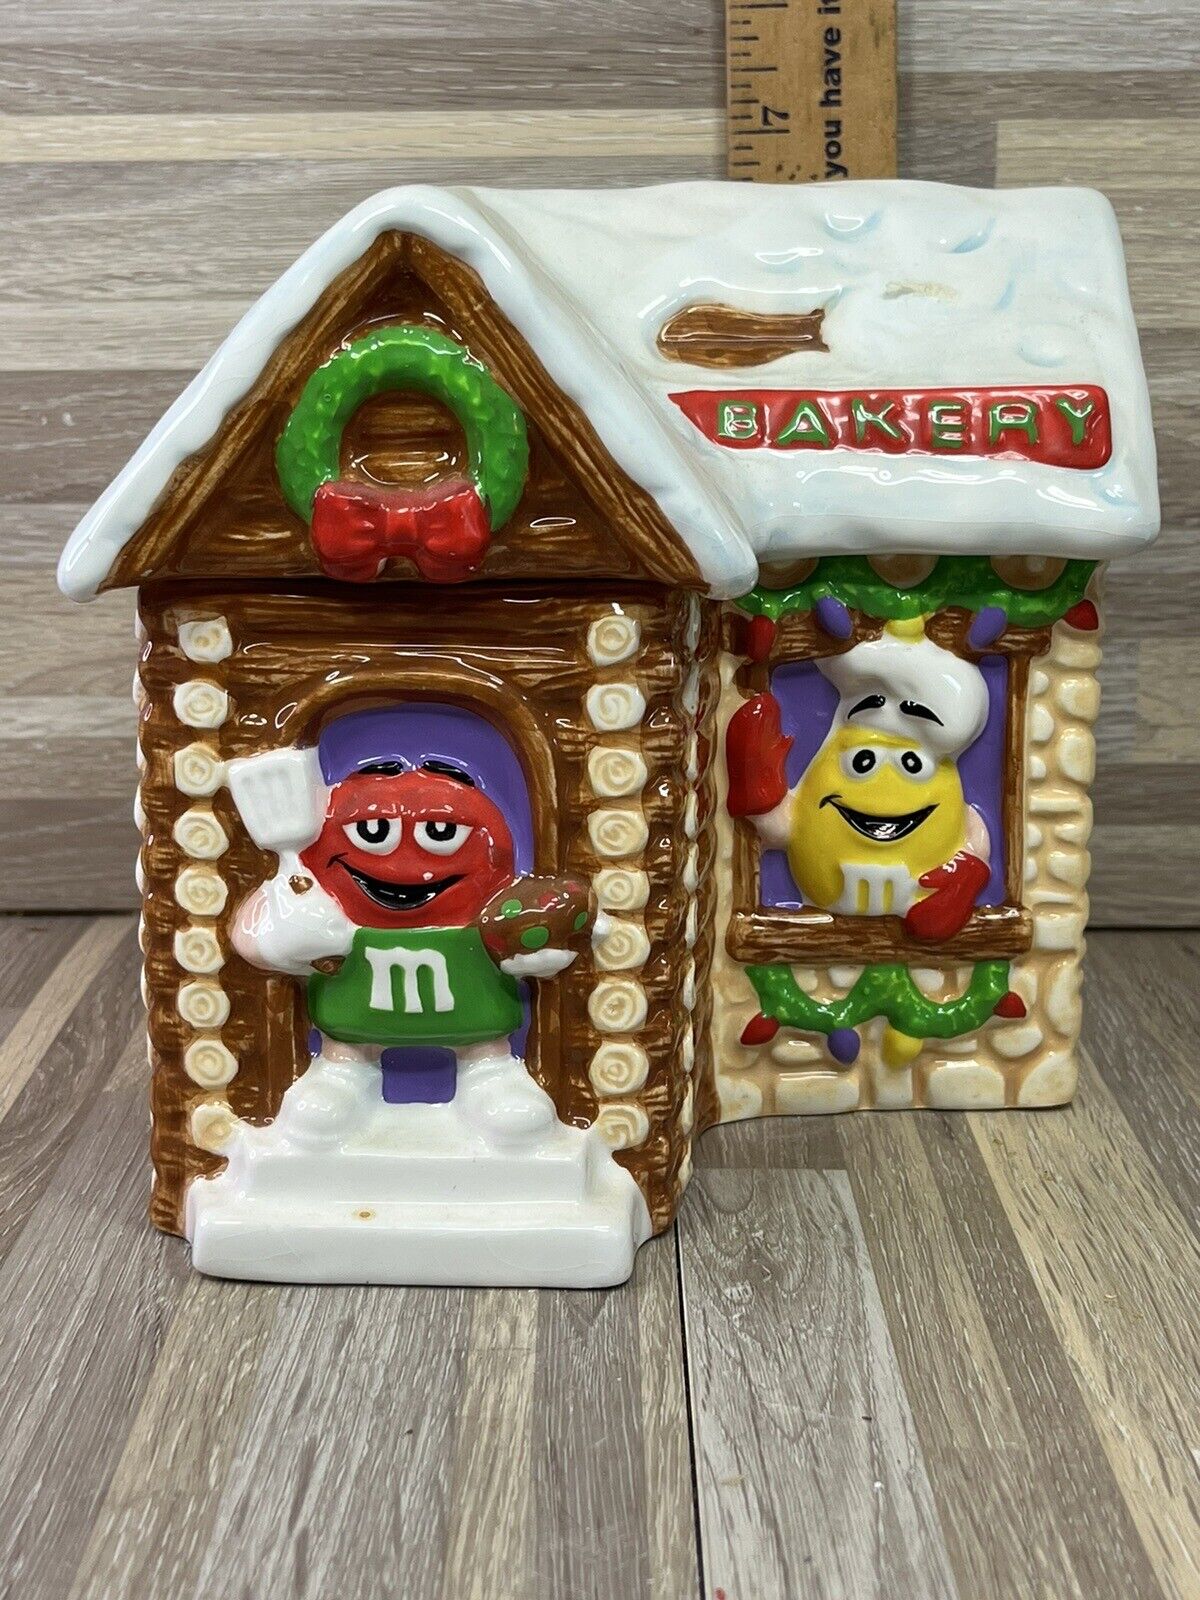 M&M\'S LOG CABIN BAKERY COOKIE CANDY CONTAINER CERAMIC BY GALERIE  2003